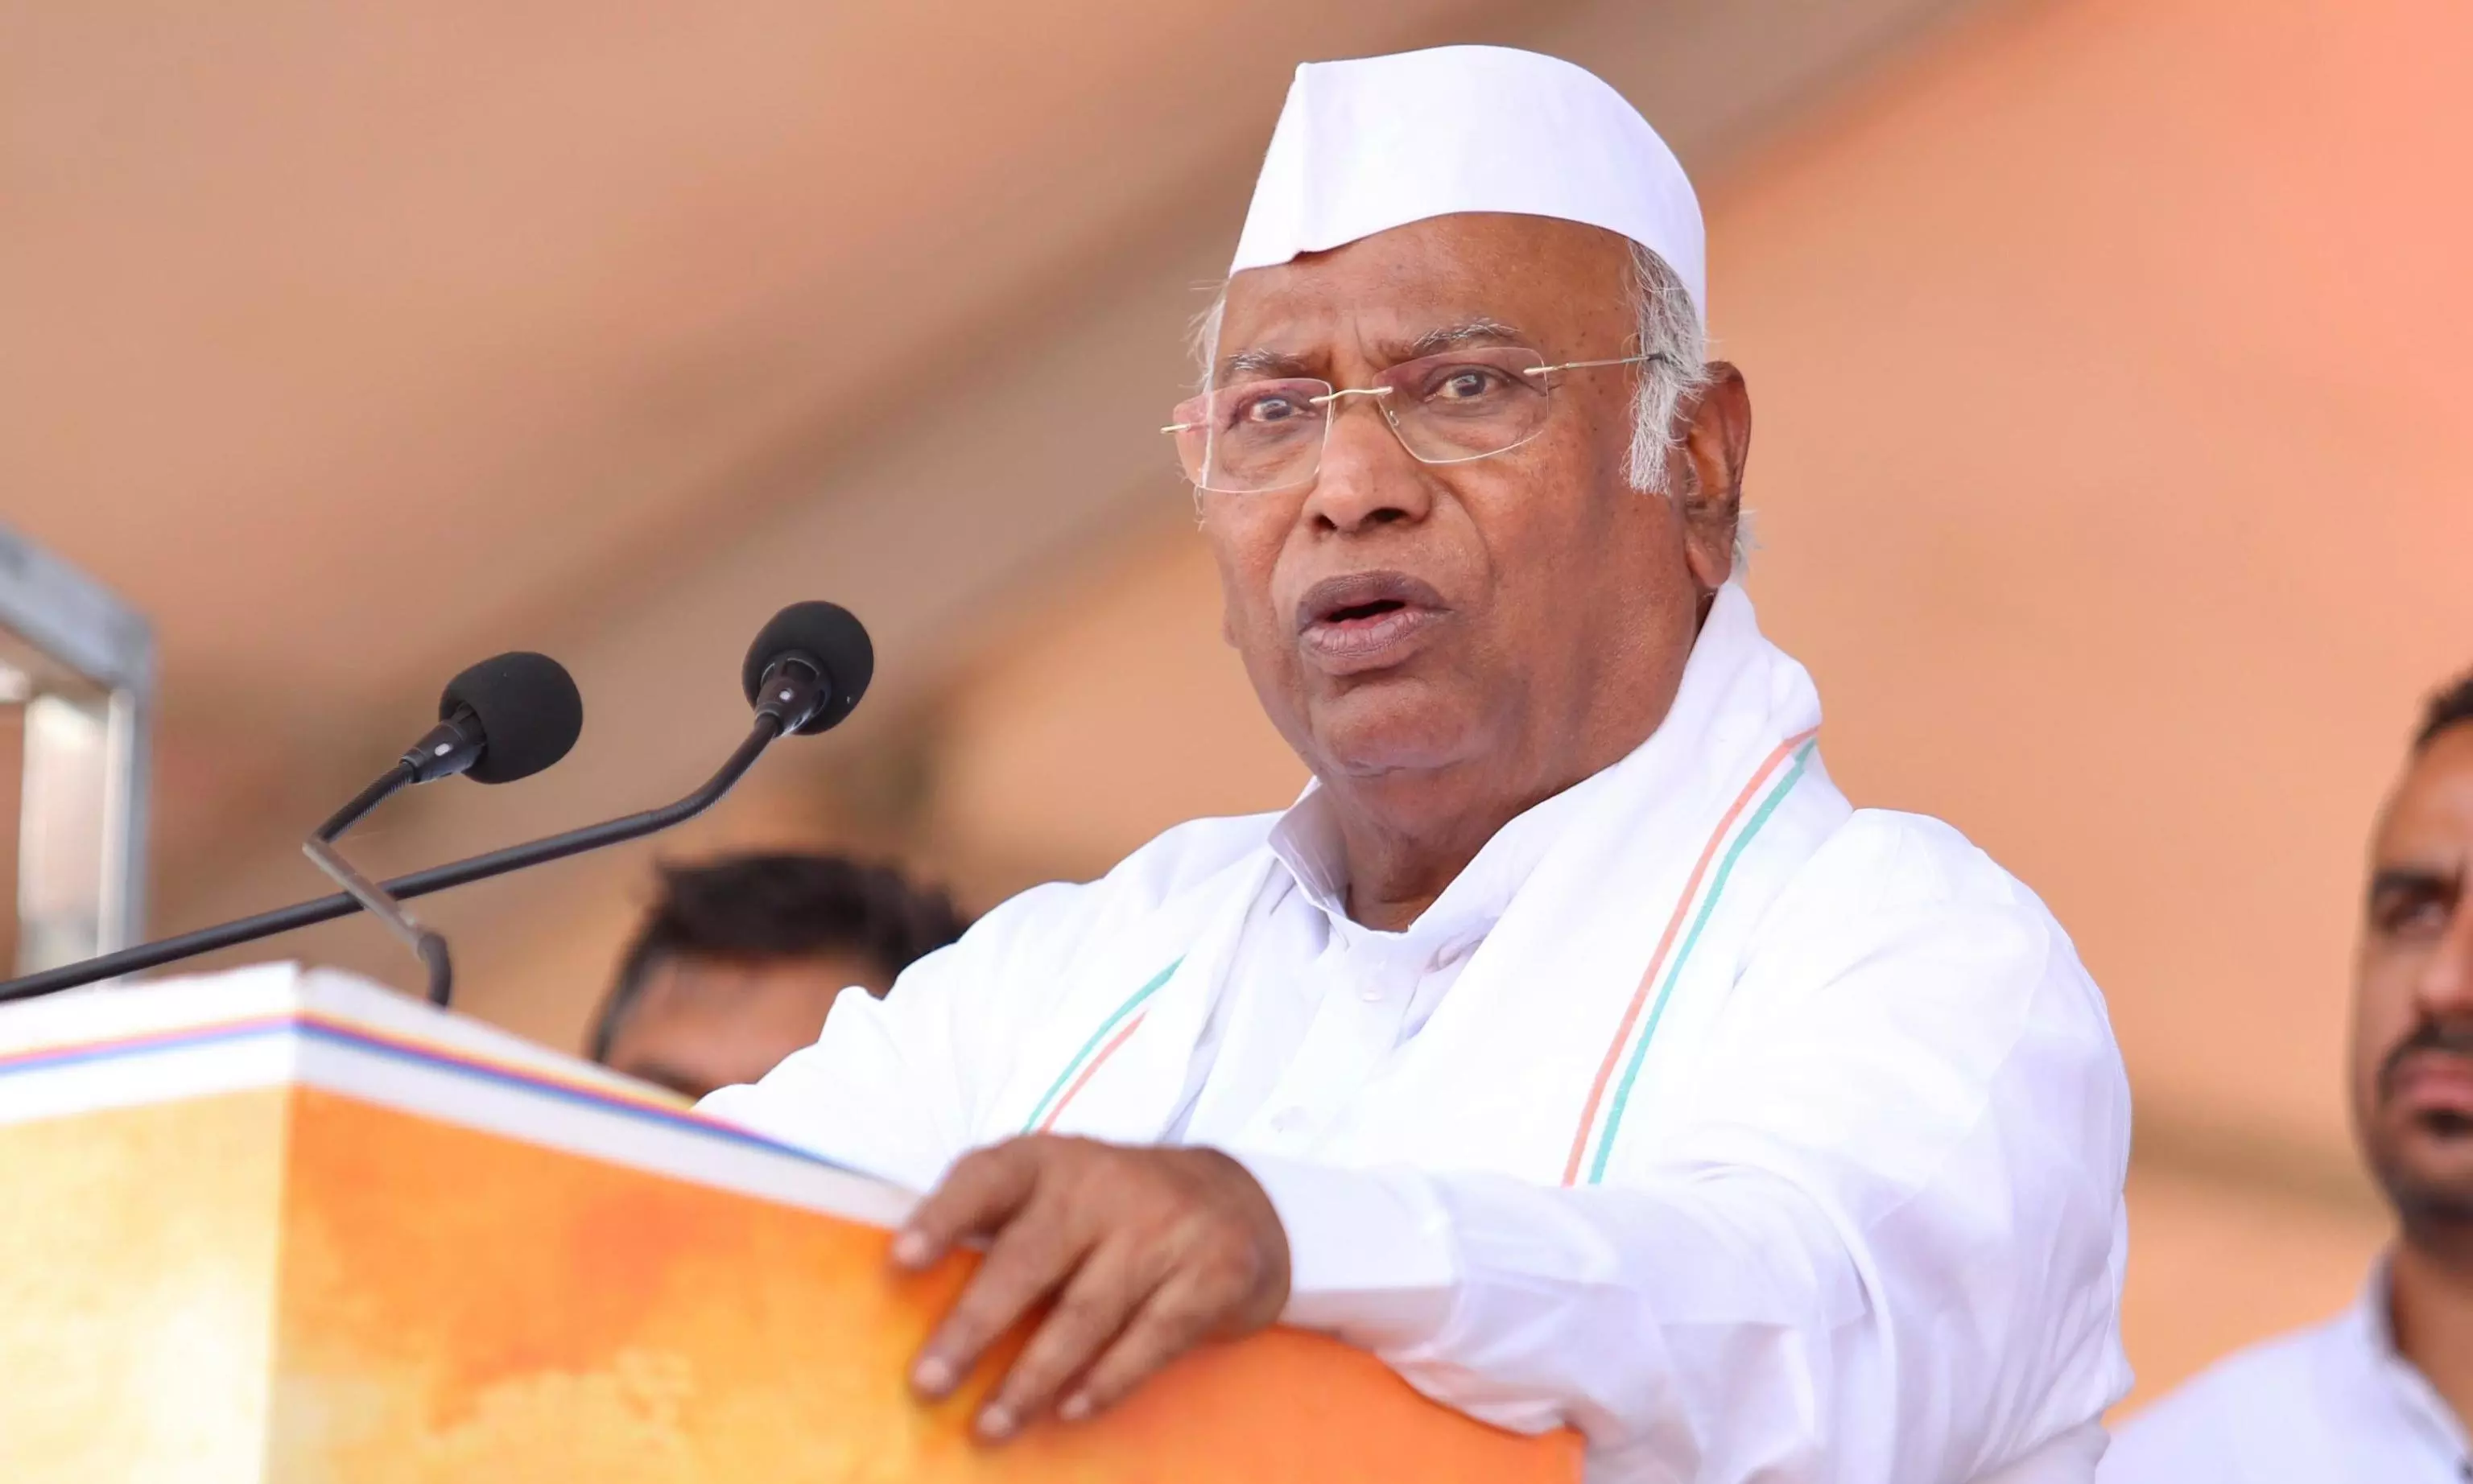 Constitution will be scrapped, democracy will end if Modi-Shah voted to power: Kharge